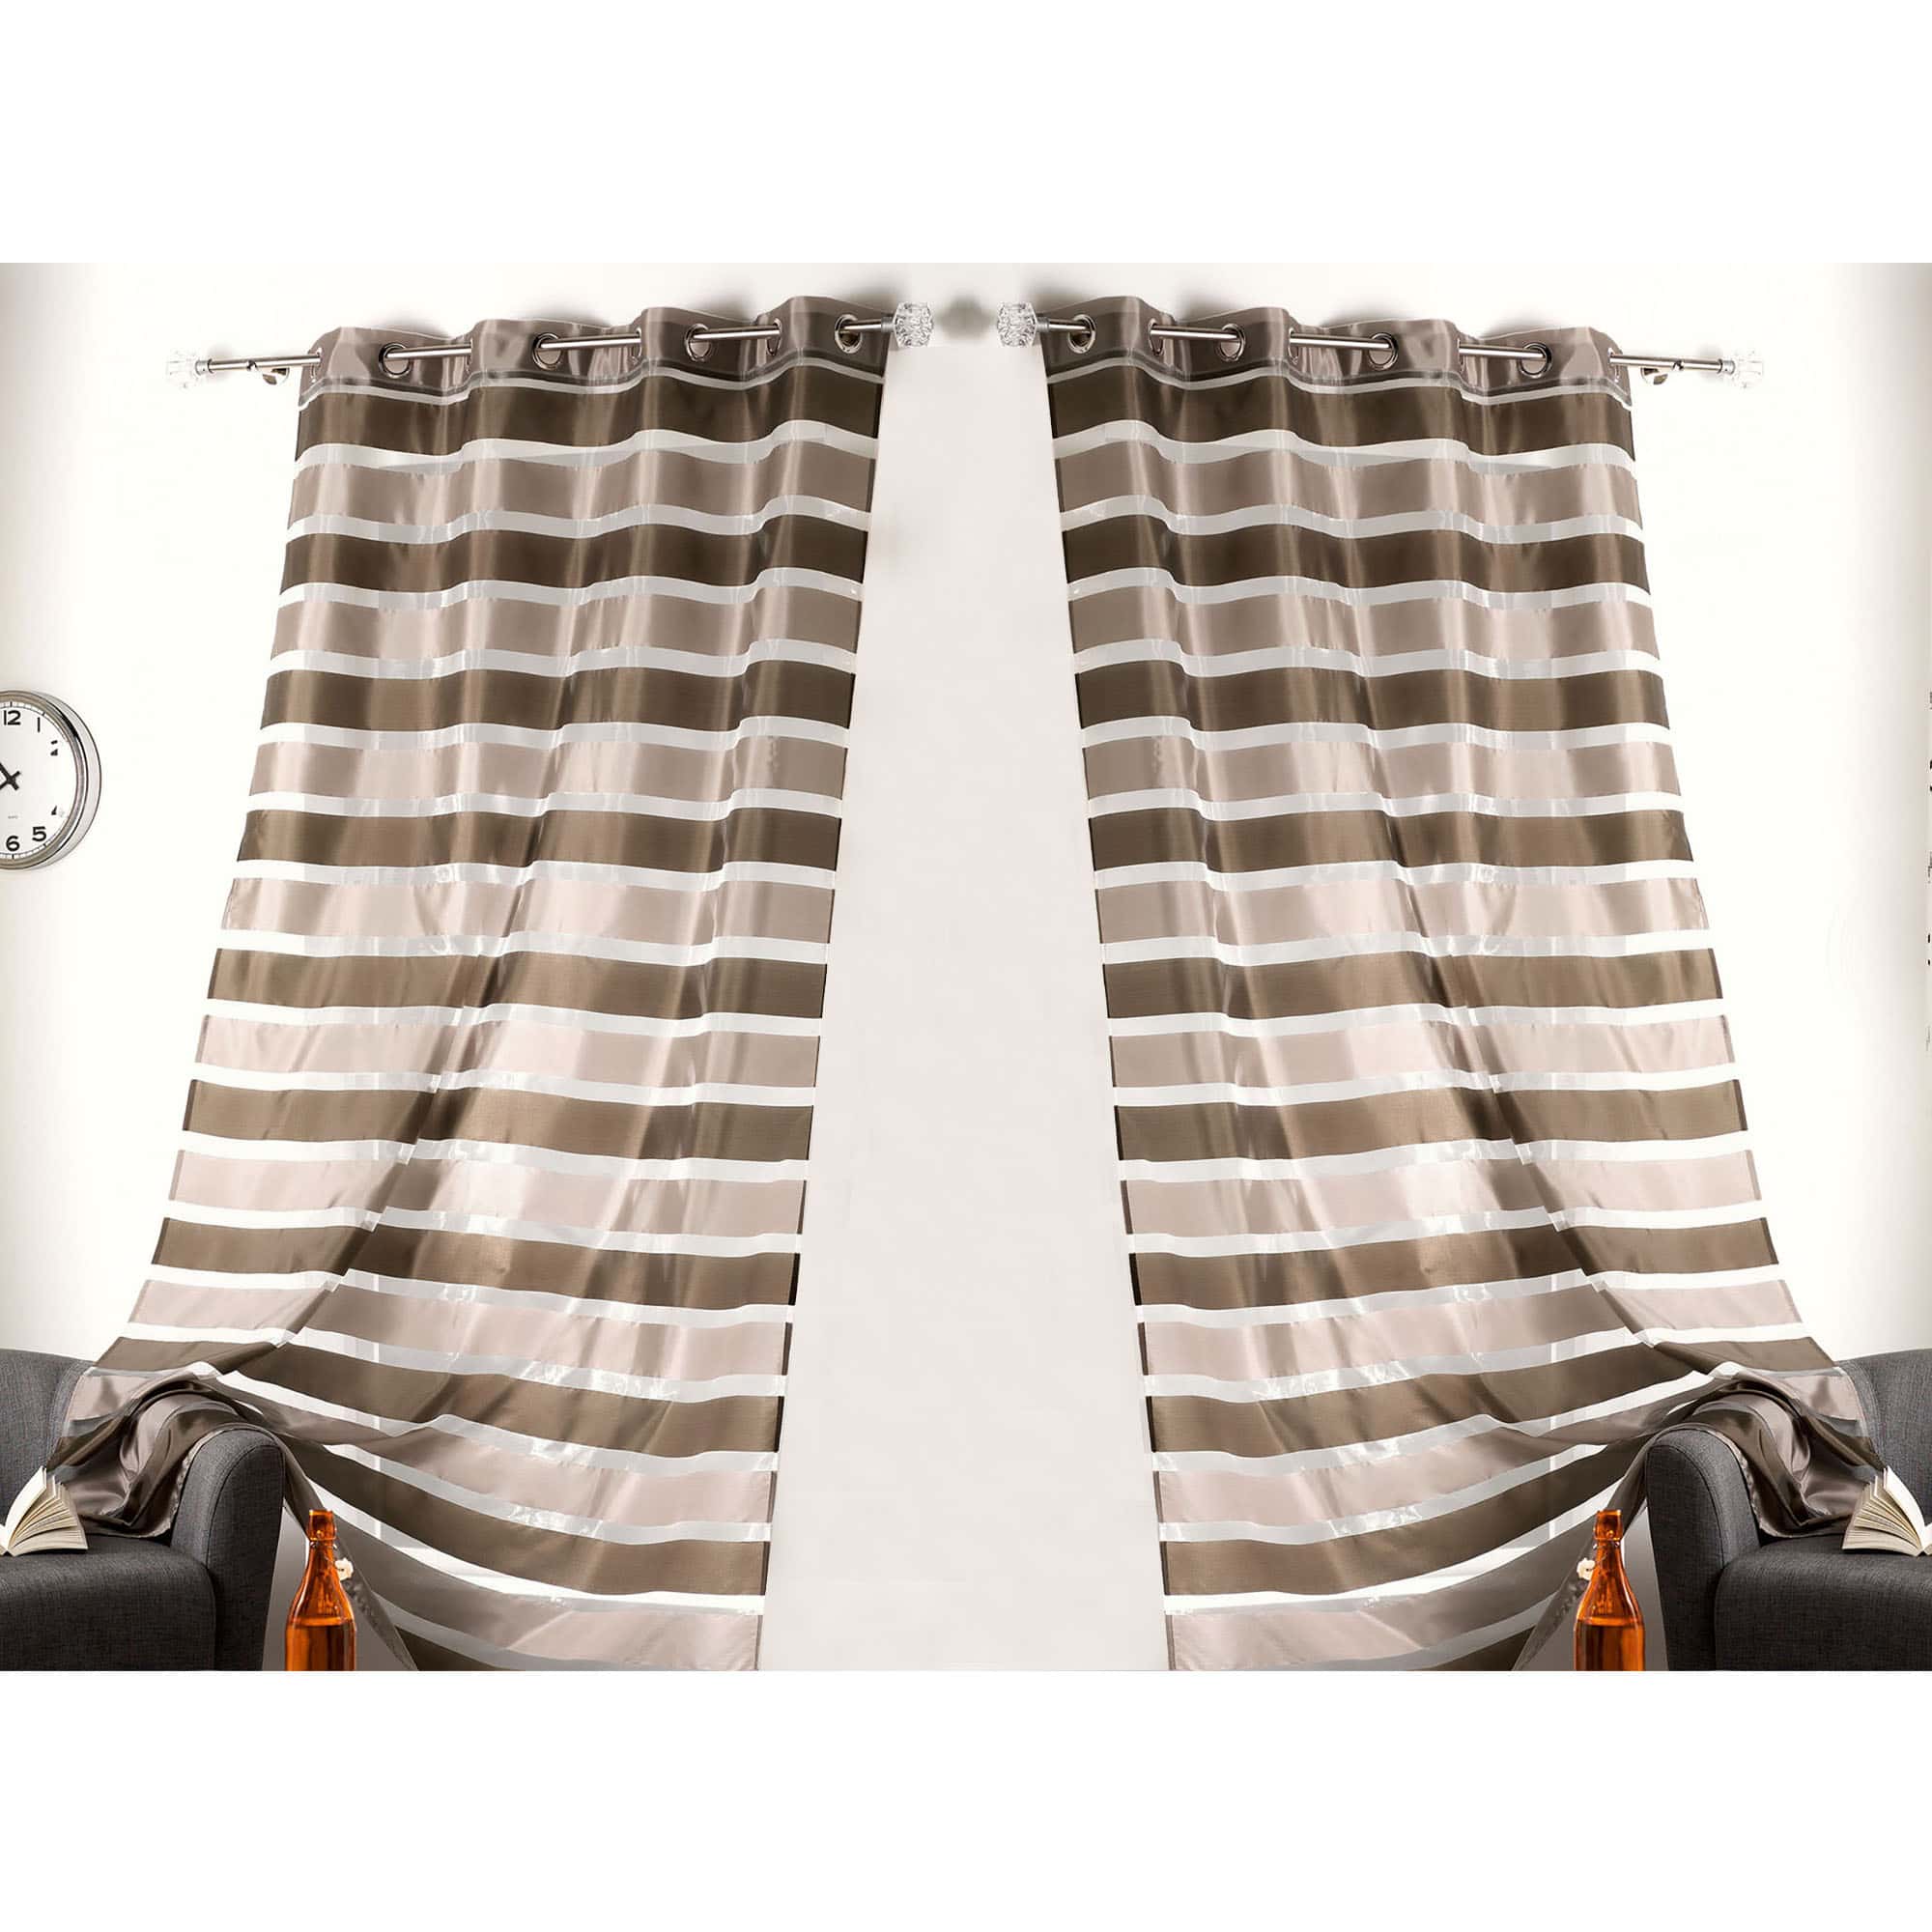 bicolor brown beige organza striped sheer curtain panels 2 pieces for large window